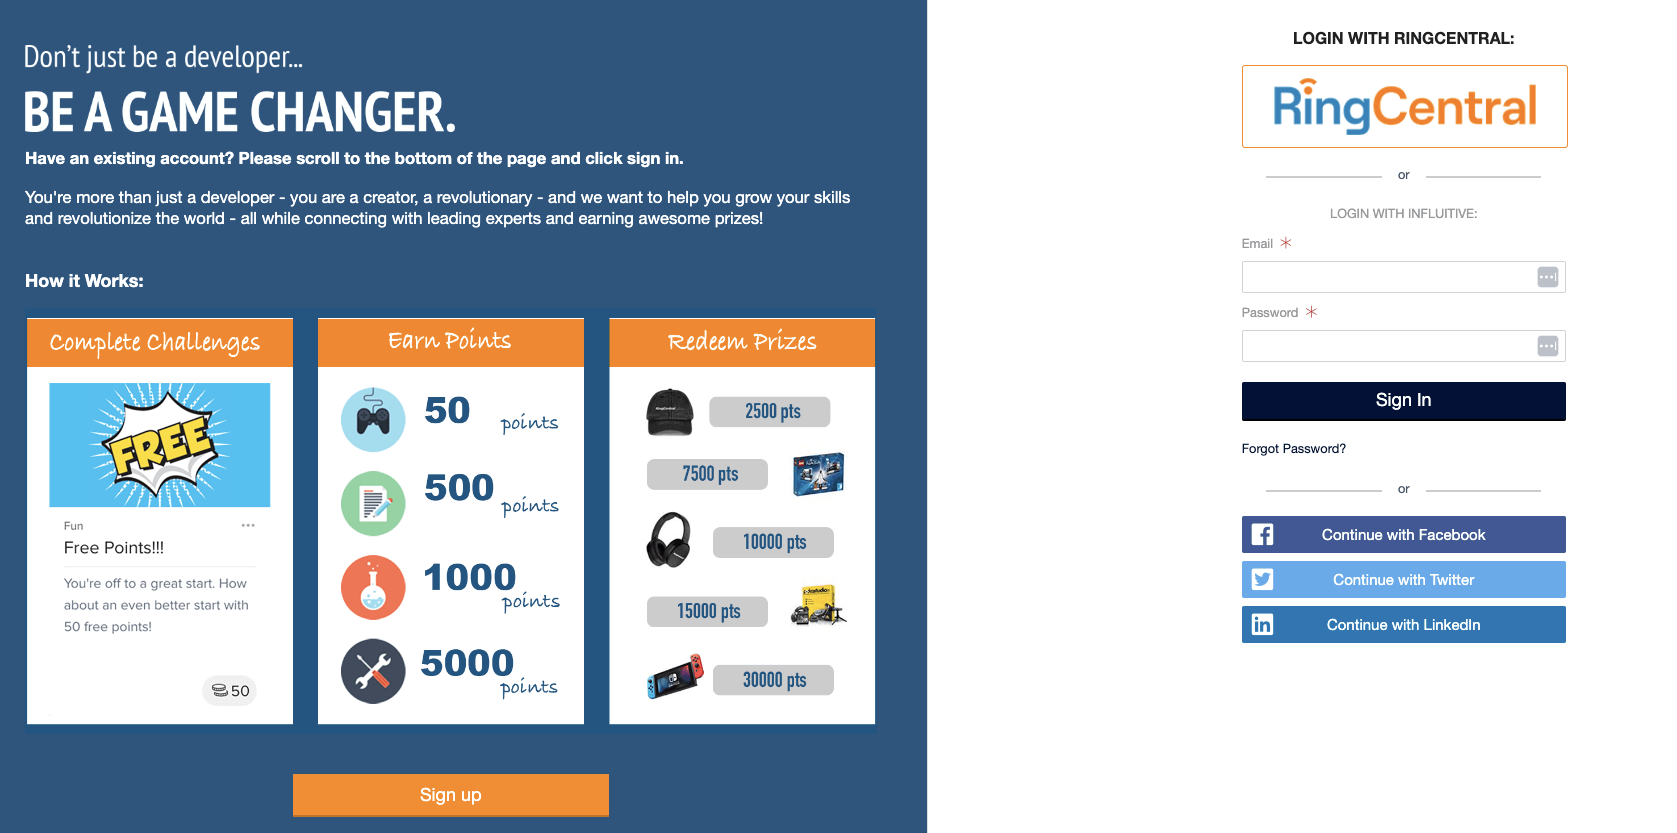 SaaS Relationship Marketing: Screenshot of RingCentral's webpage showing the mechanics of how developers can earn points and exchange them for items